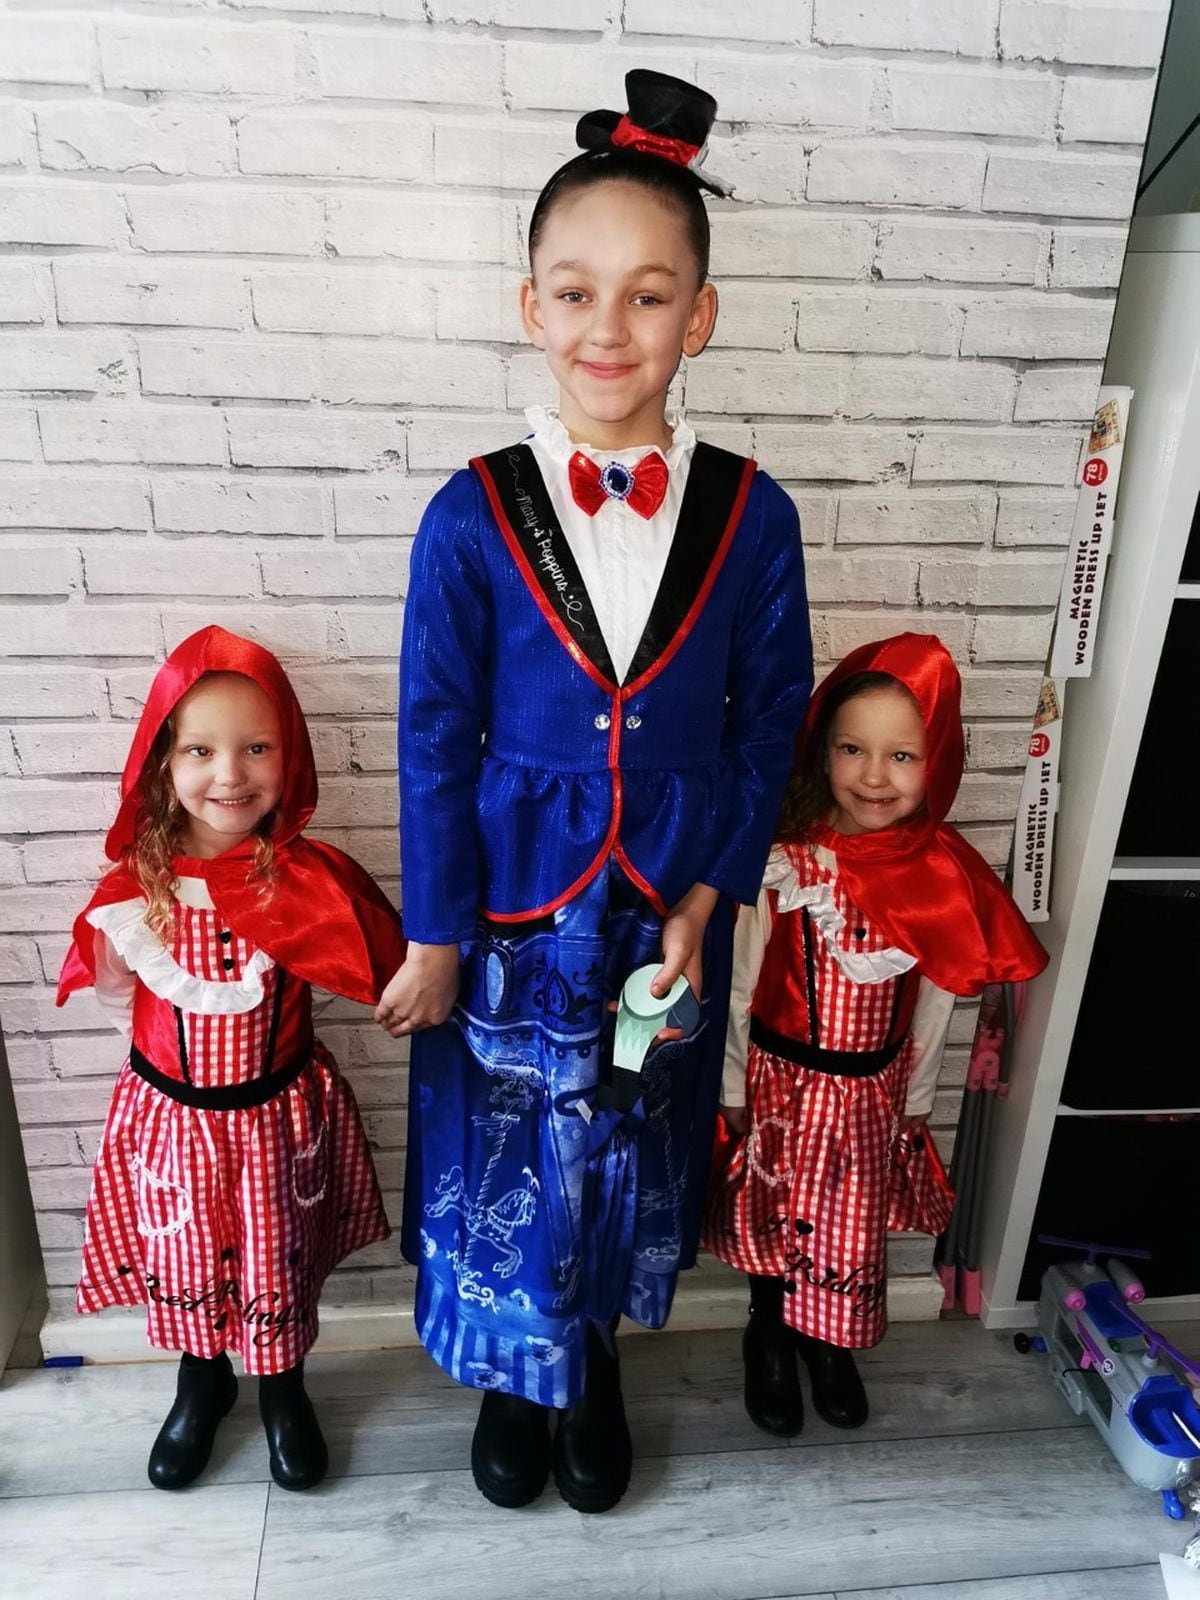 Kayleigh Harrison sent a picture of her twins, five, and their older sister, aged nine. 